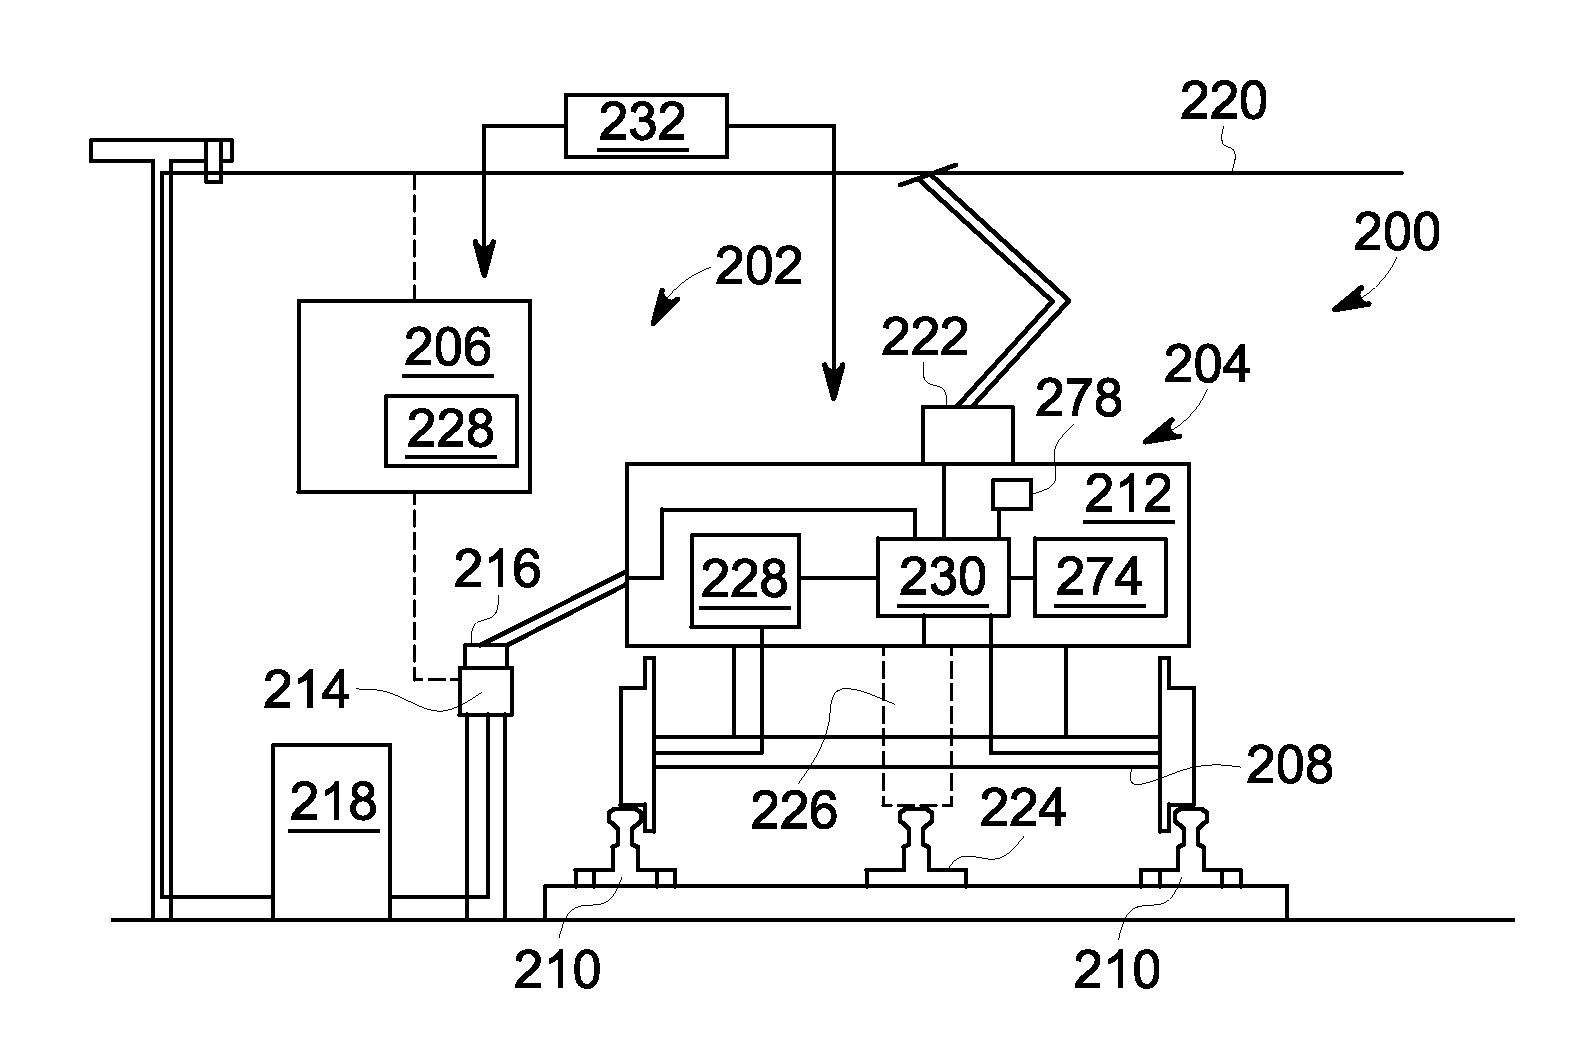 Communication system and method for a rail vehicle consist